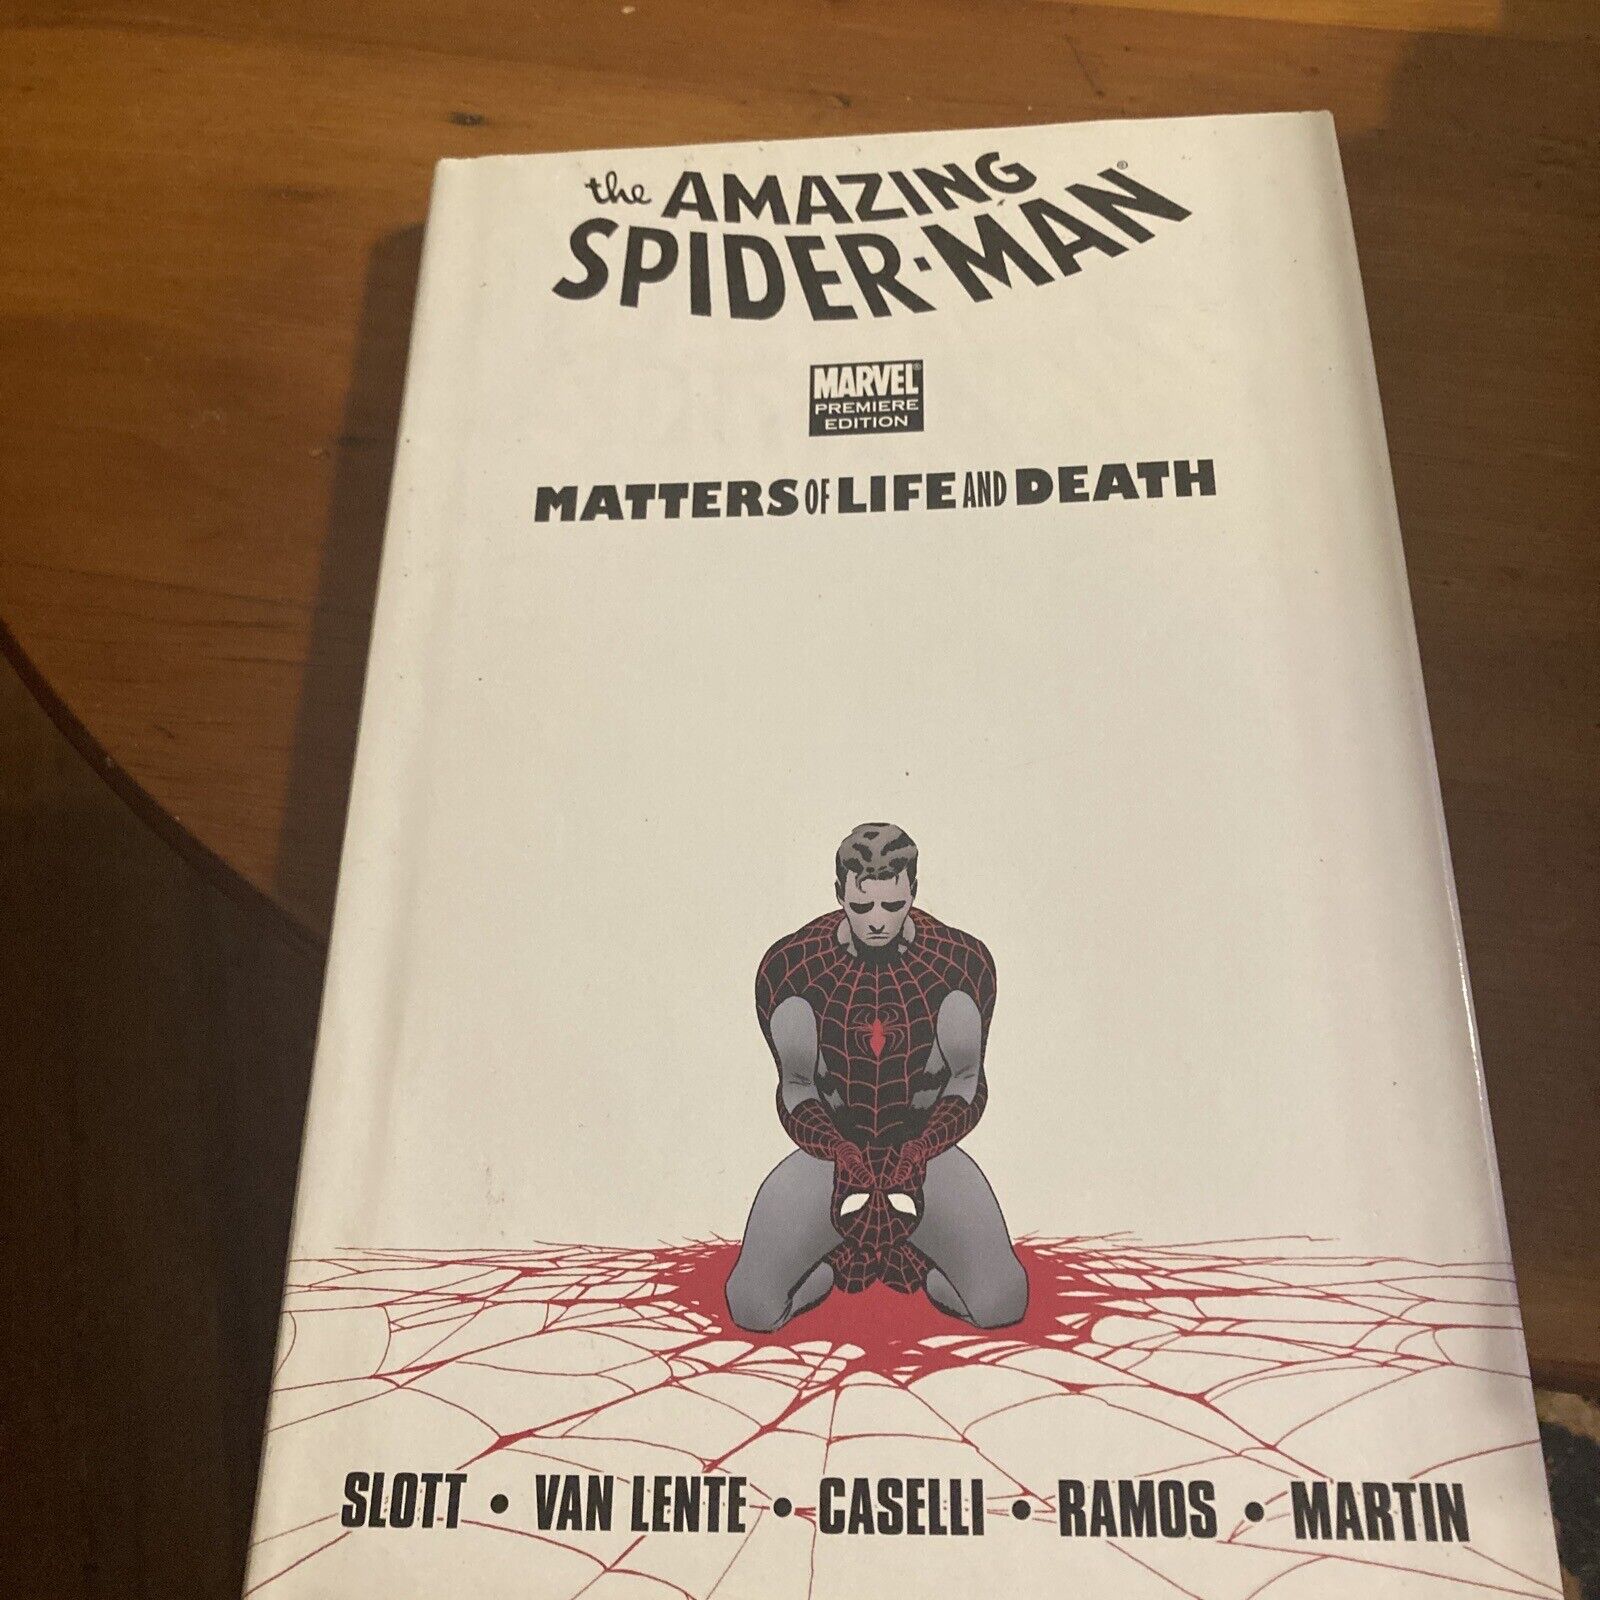 Spider-Man: Matters of Life and Death Hardcover